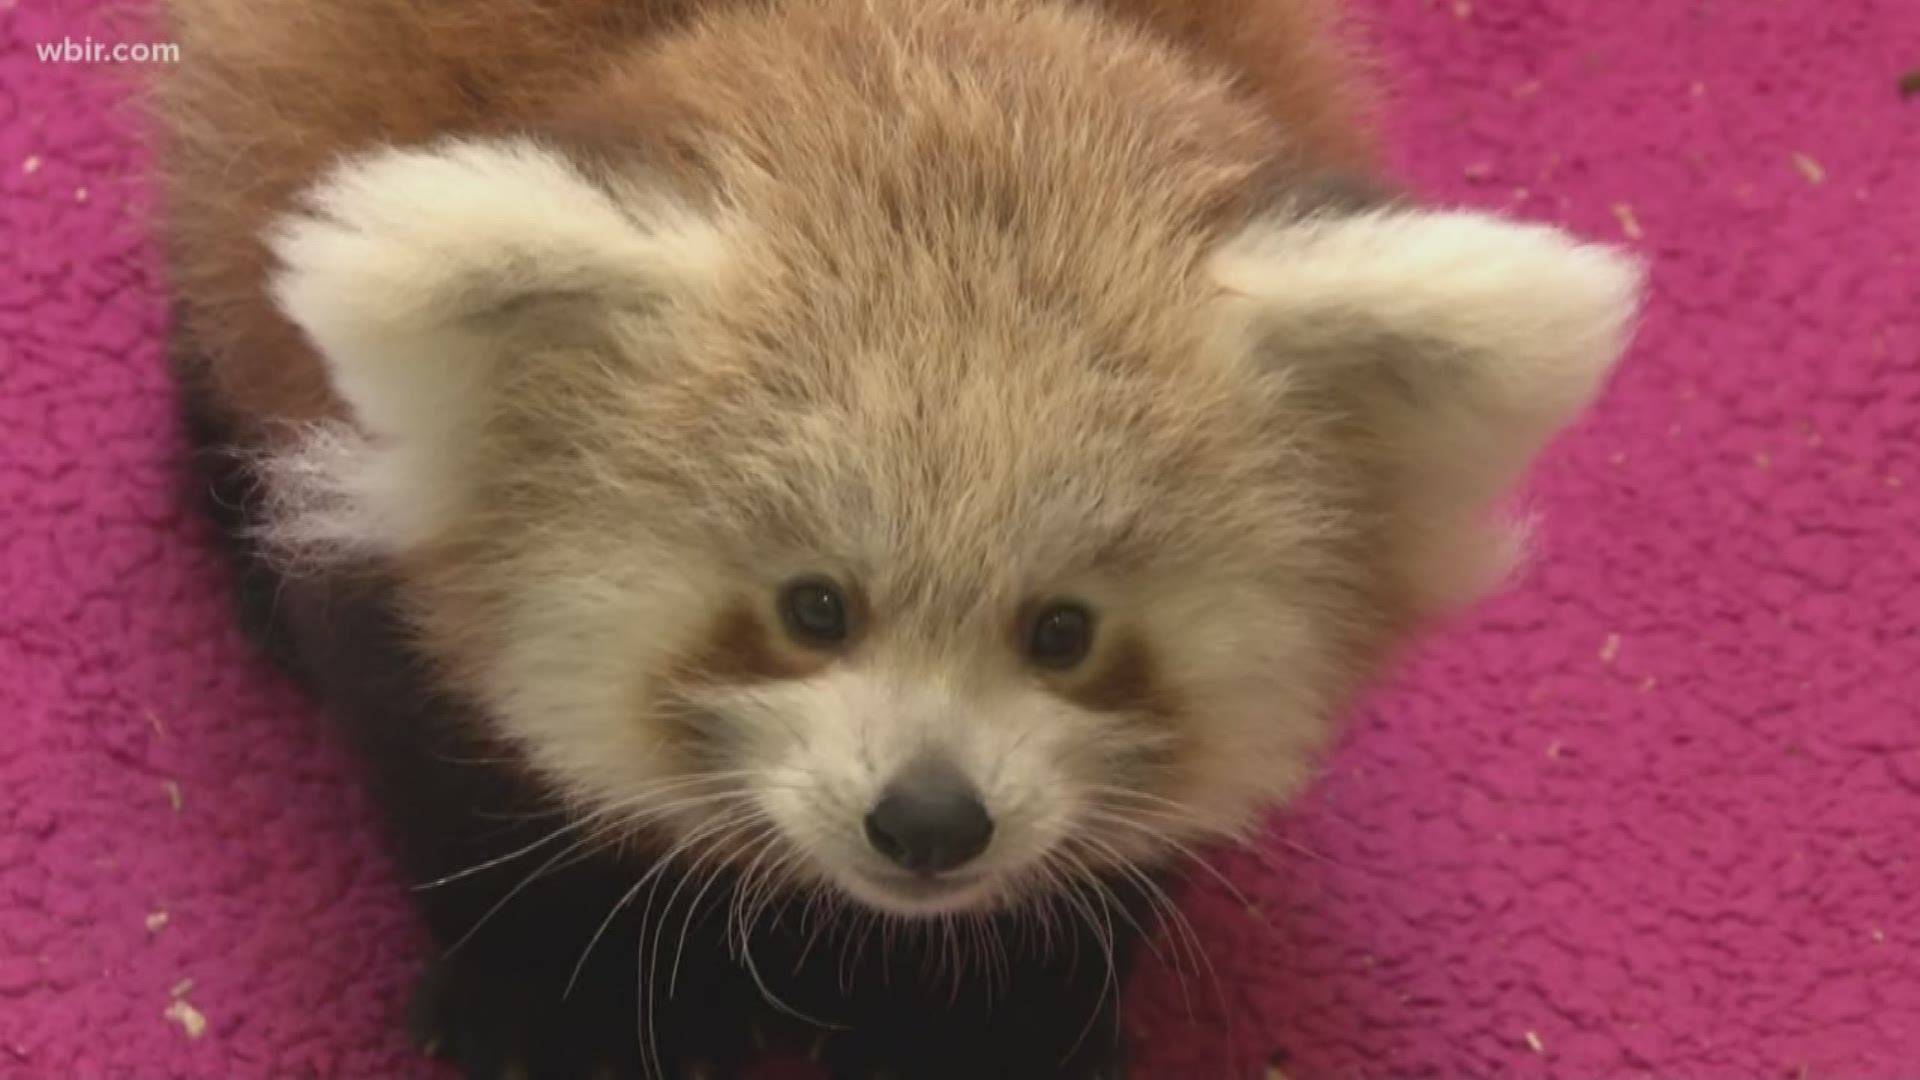 Now, you'll be able to see the red panda cubs all the time at Zoo Knoxville.